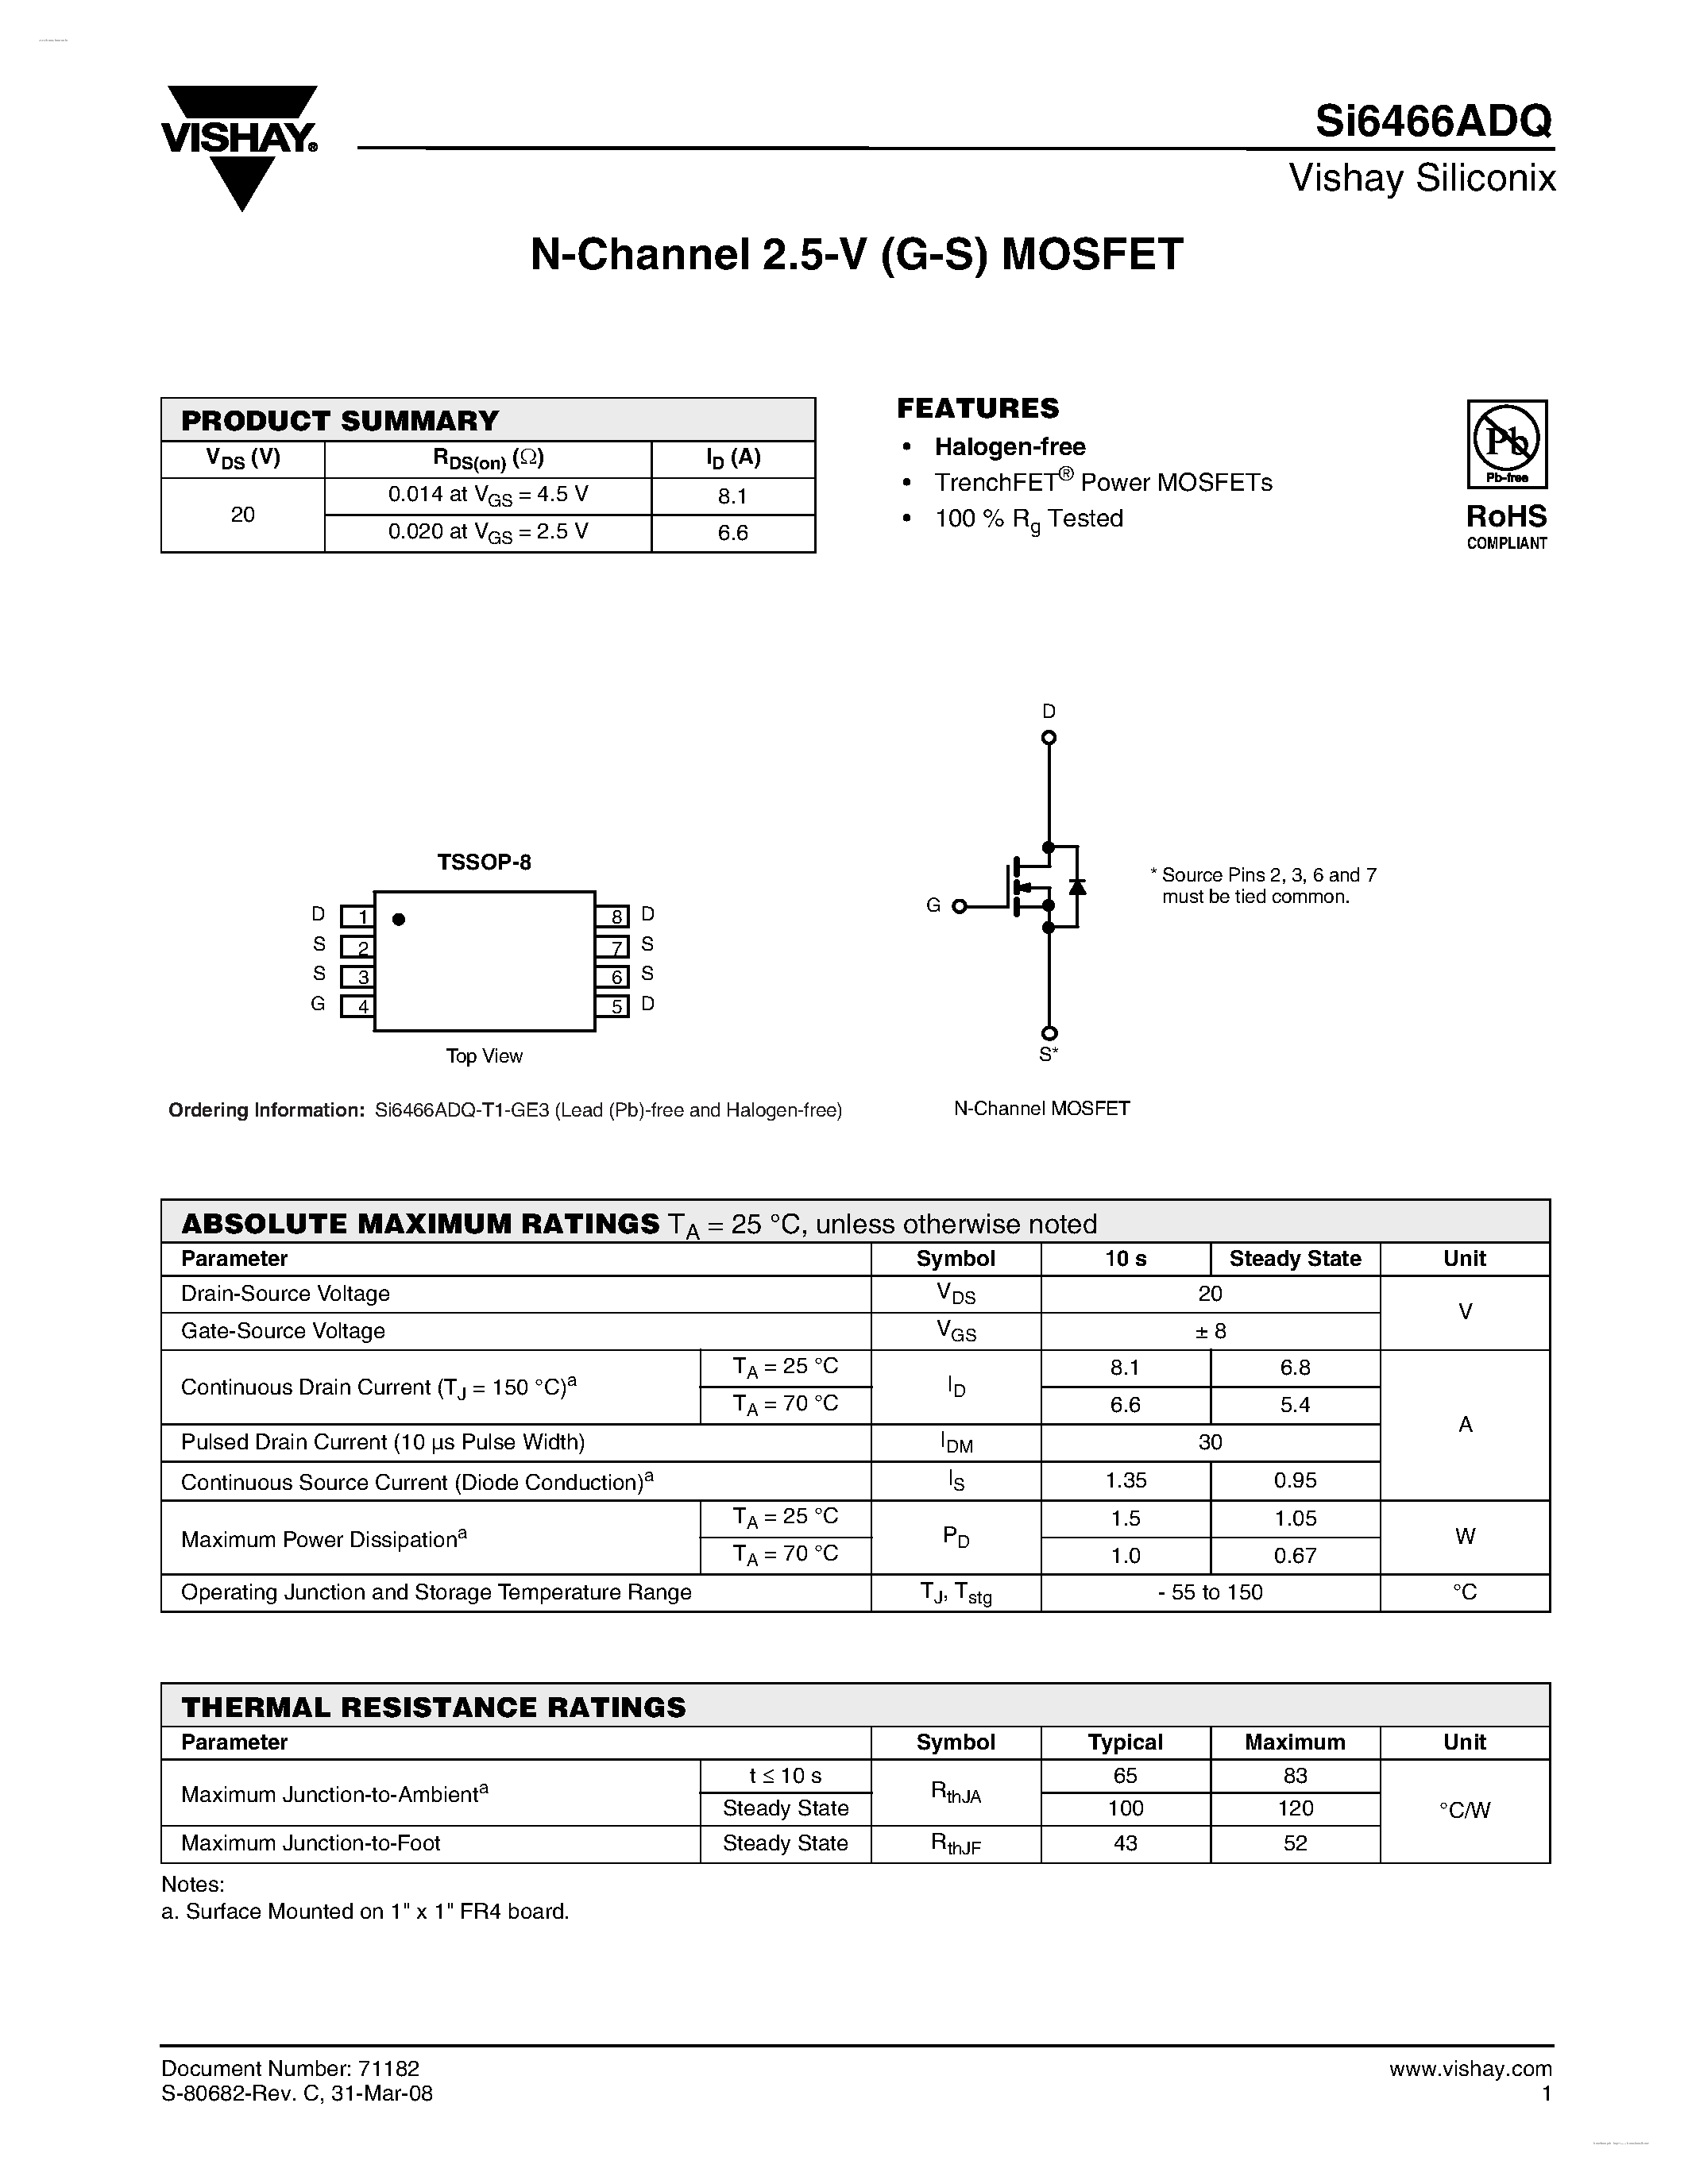 Datasheet SI6466ADQ - N-Channel 2.5-V (G-S) MOSFET page 1